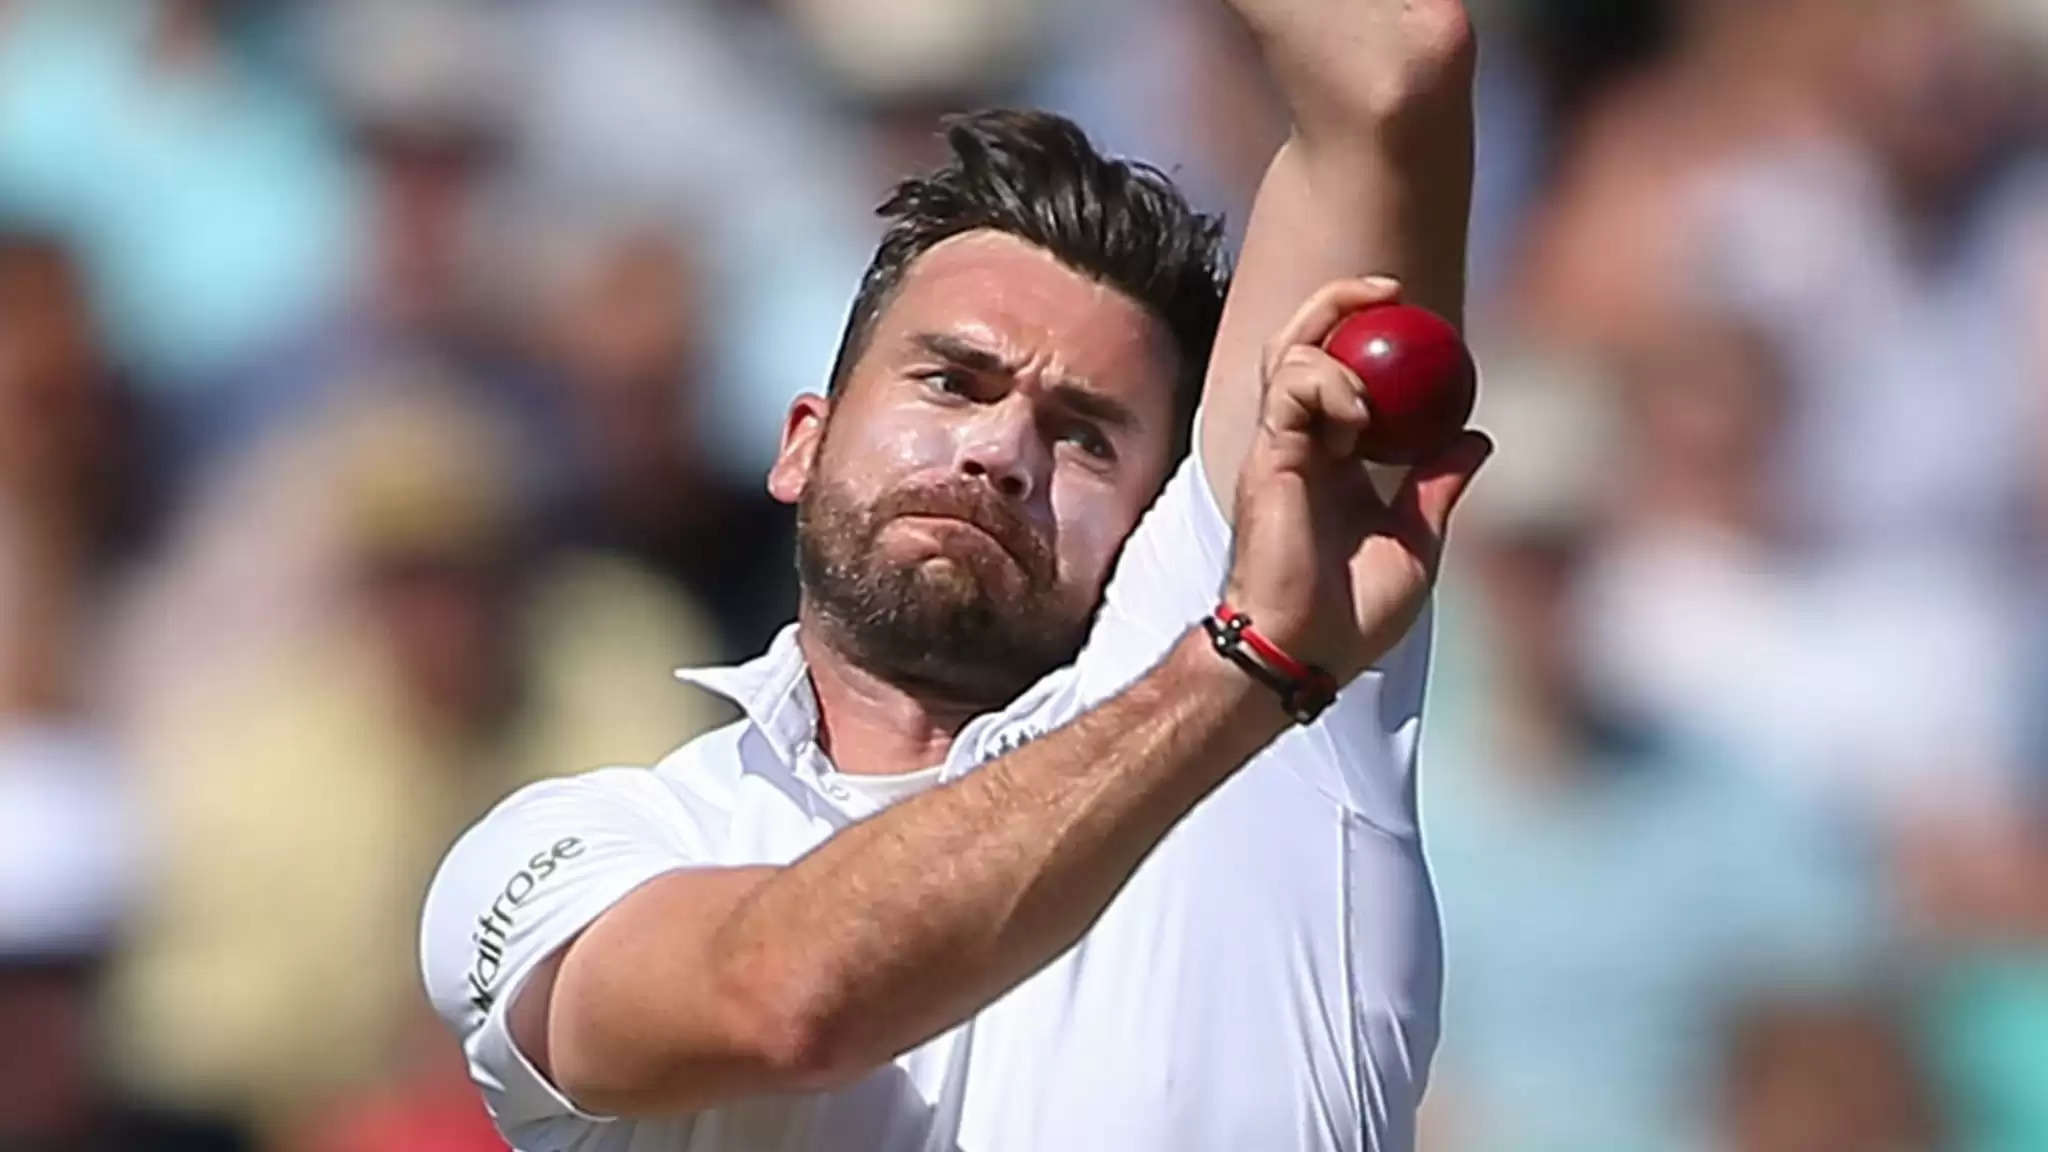 James Anderson and 600 Test wickets – A perpetual conjurer with the red cherry in hand